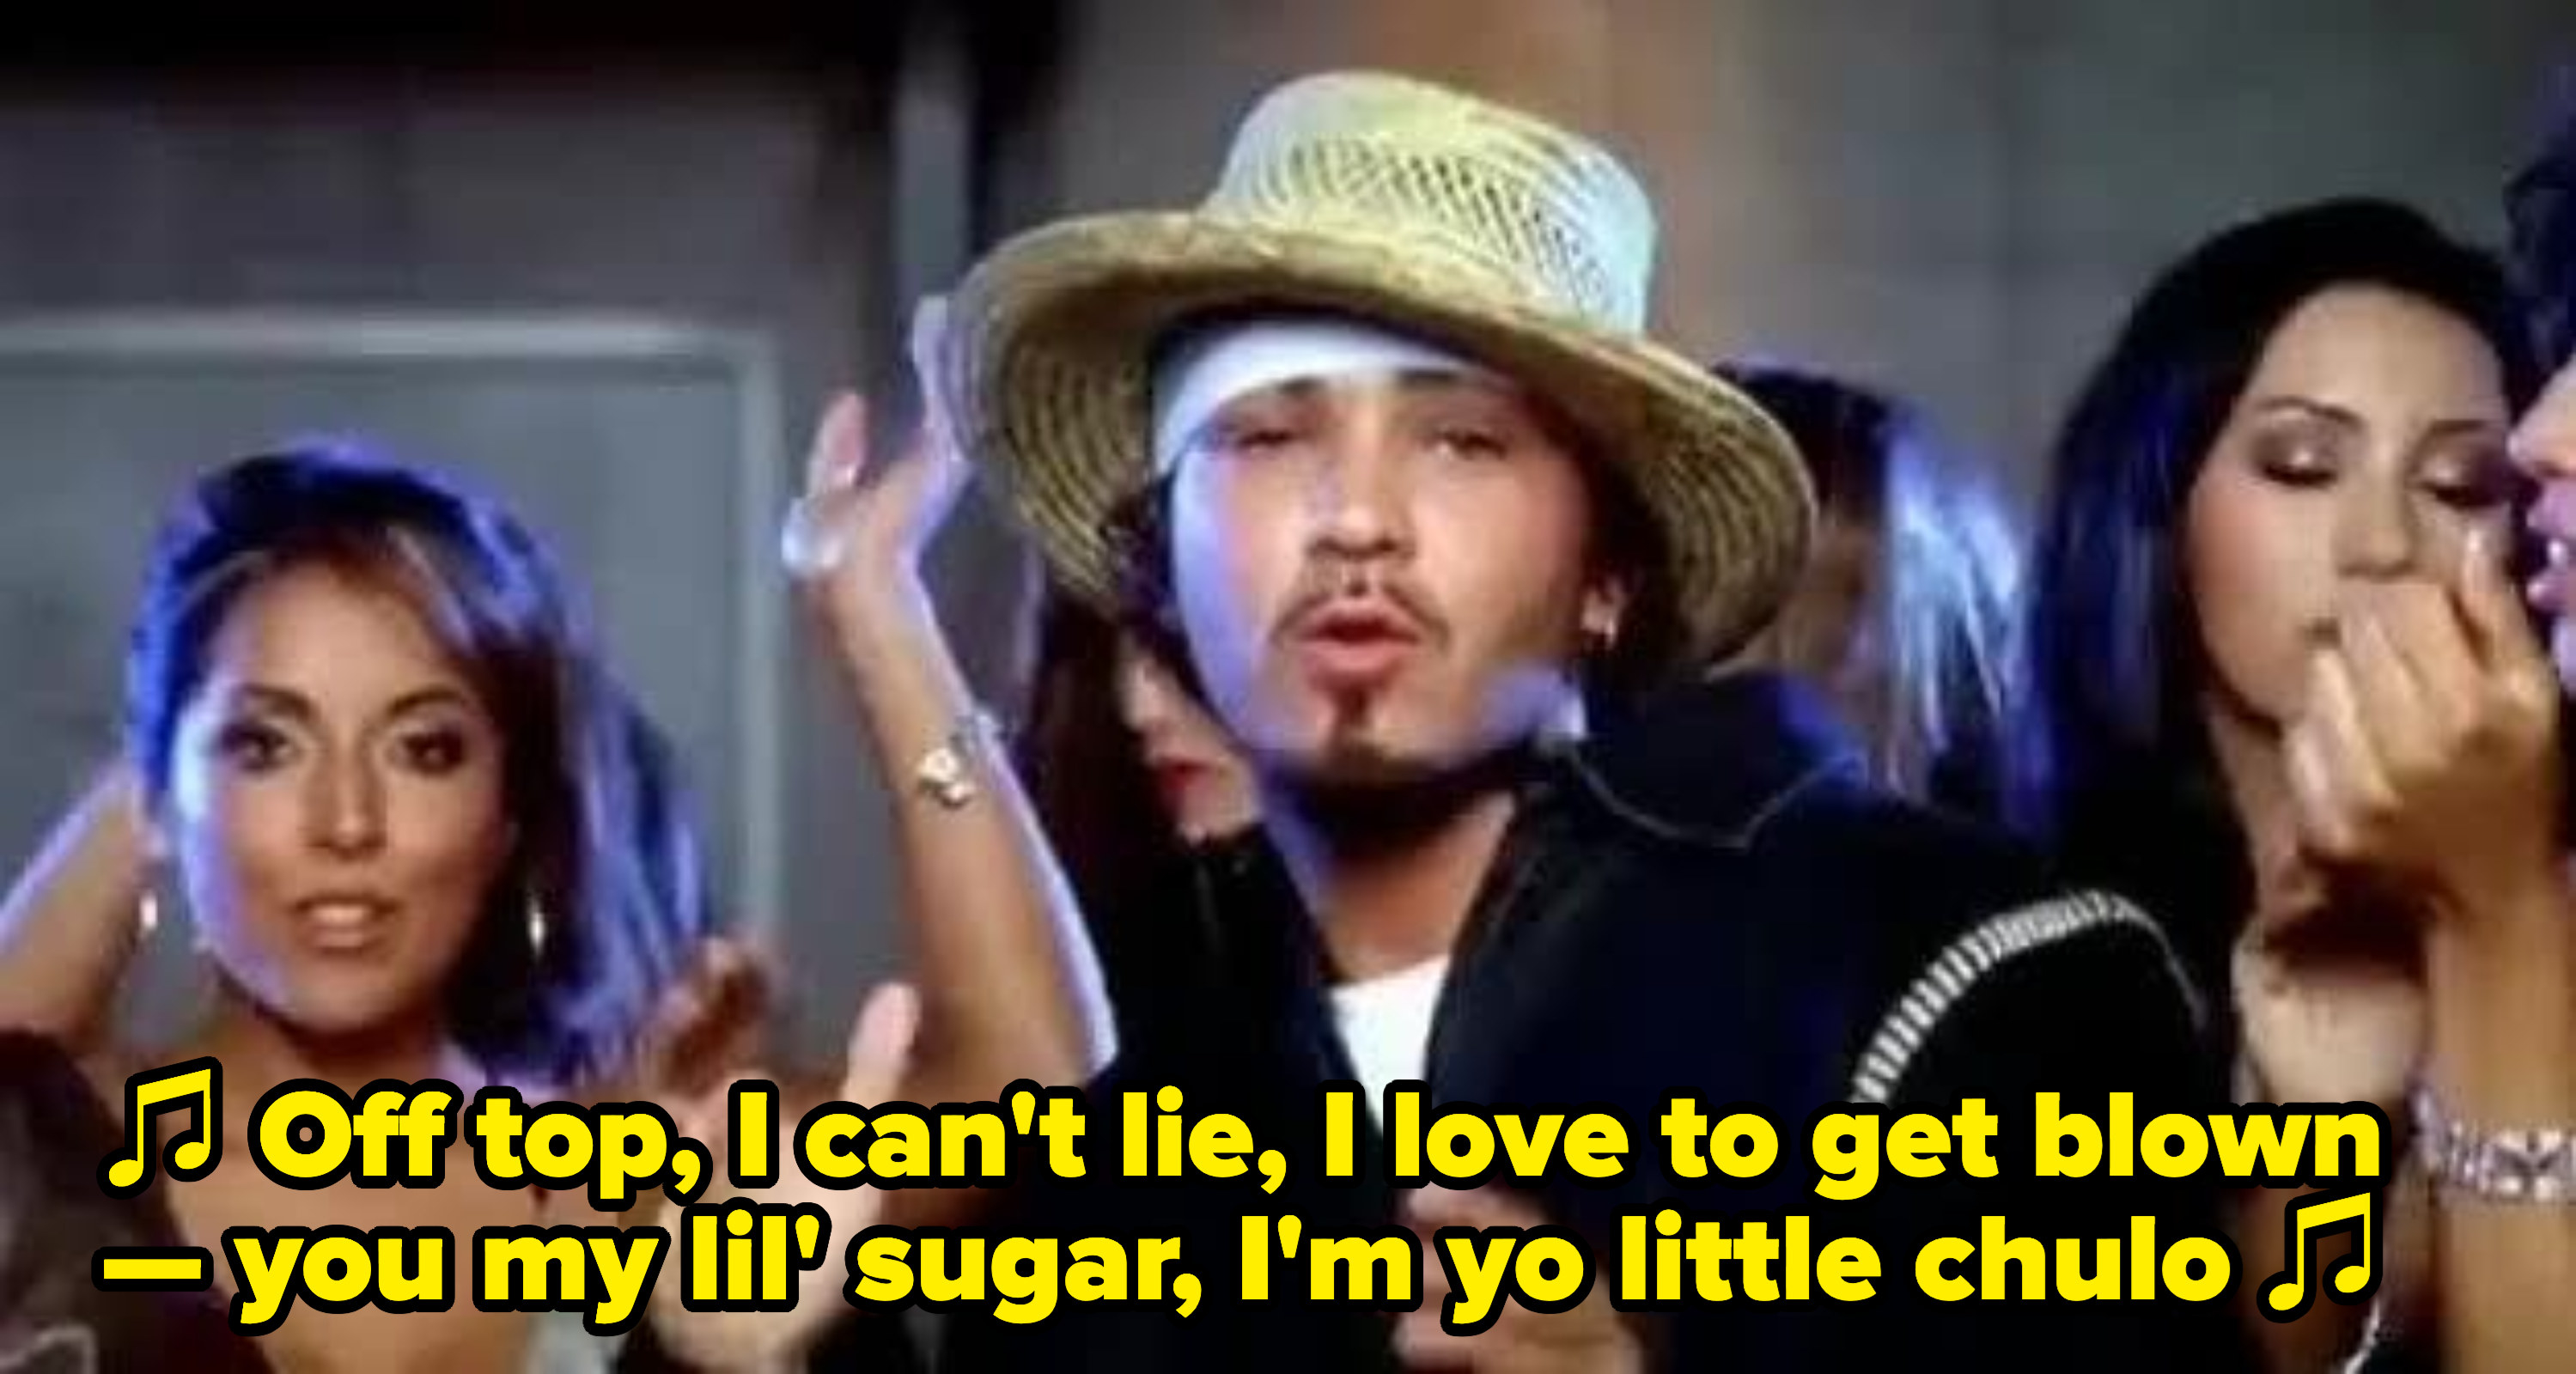 Baby Bash rapping: &quot;Off top, I can&#x27;t lie, I love to get blown -- you my lil&#x27; sugar, I&#x27;m yo little chulo&quot;